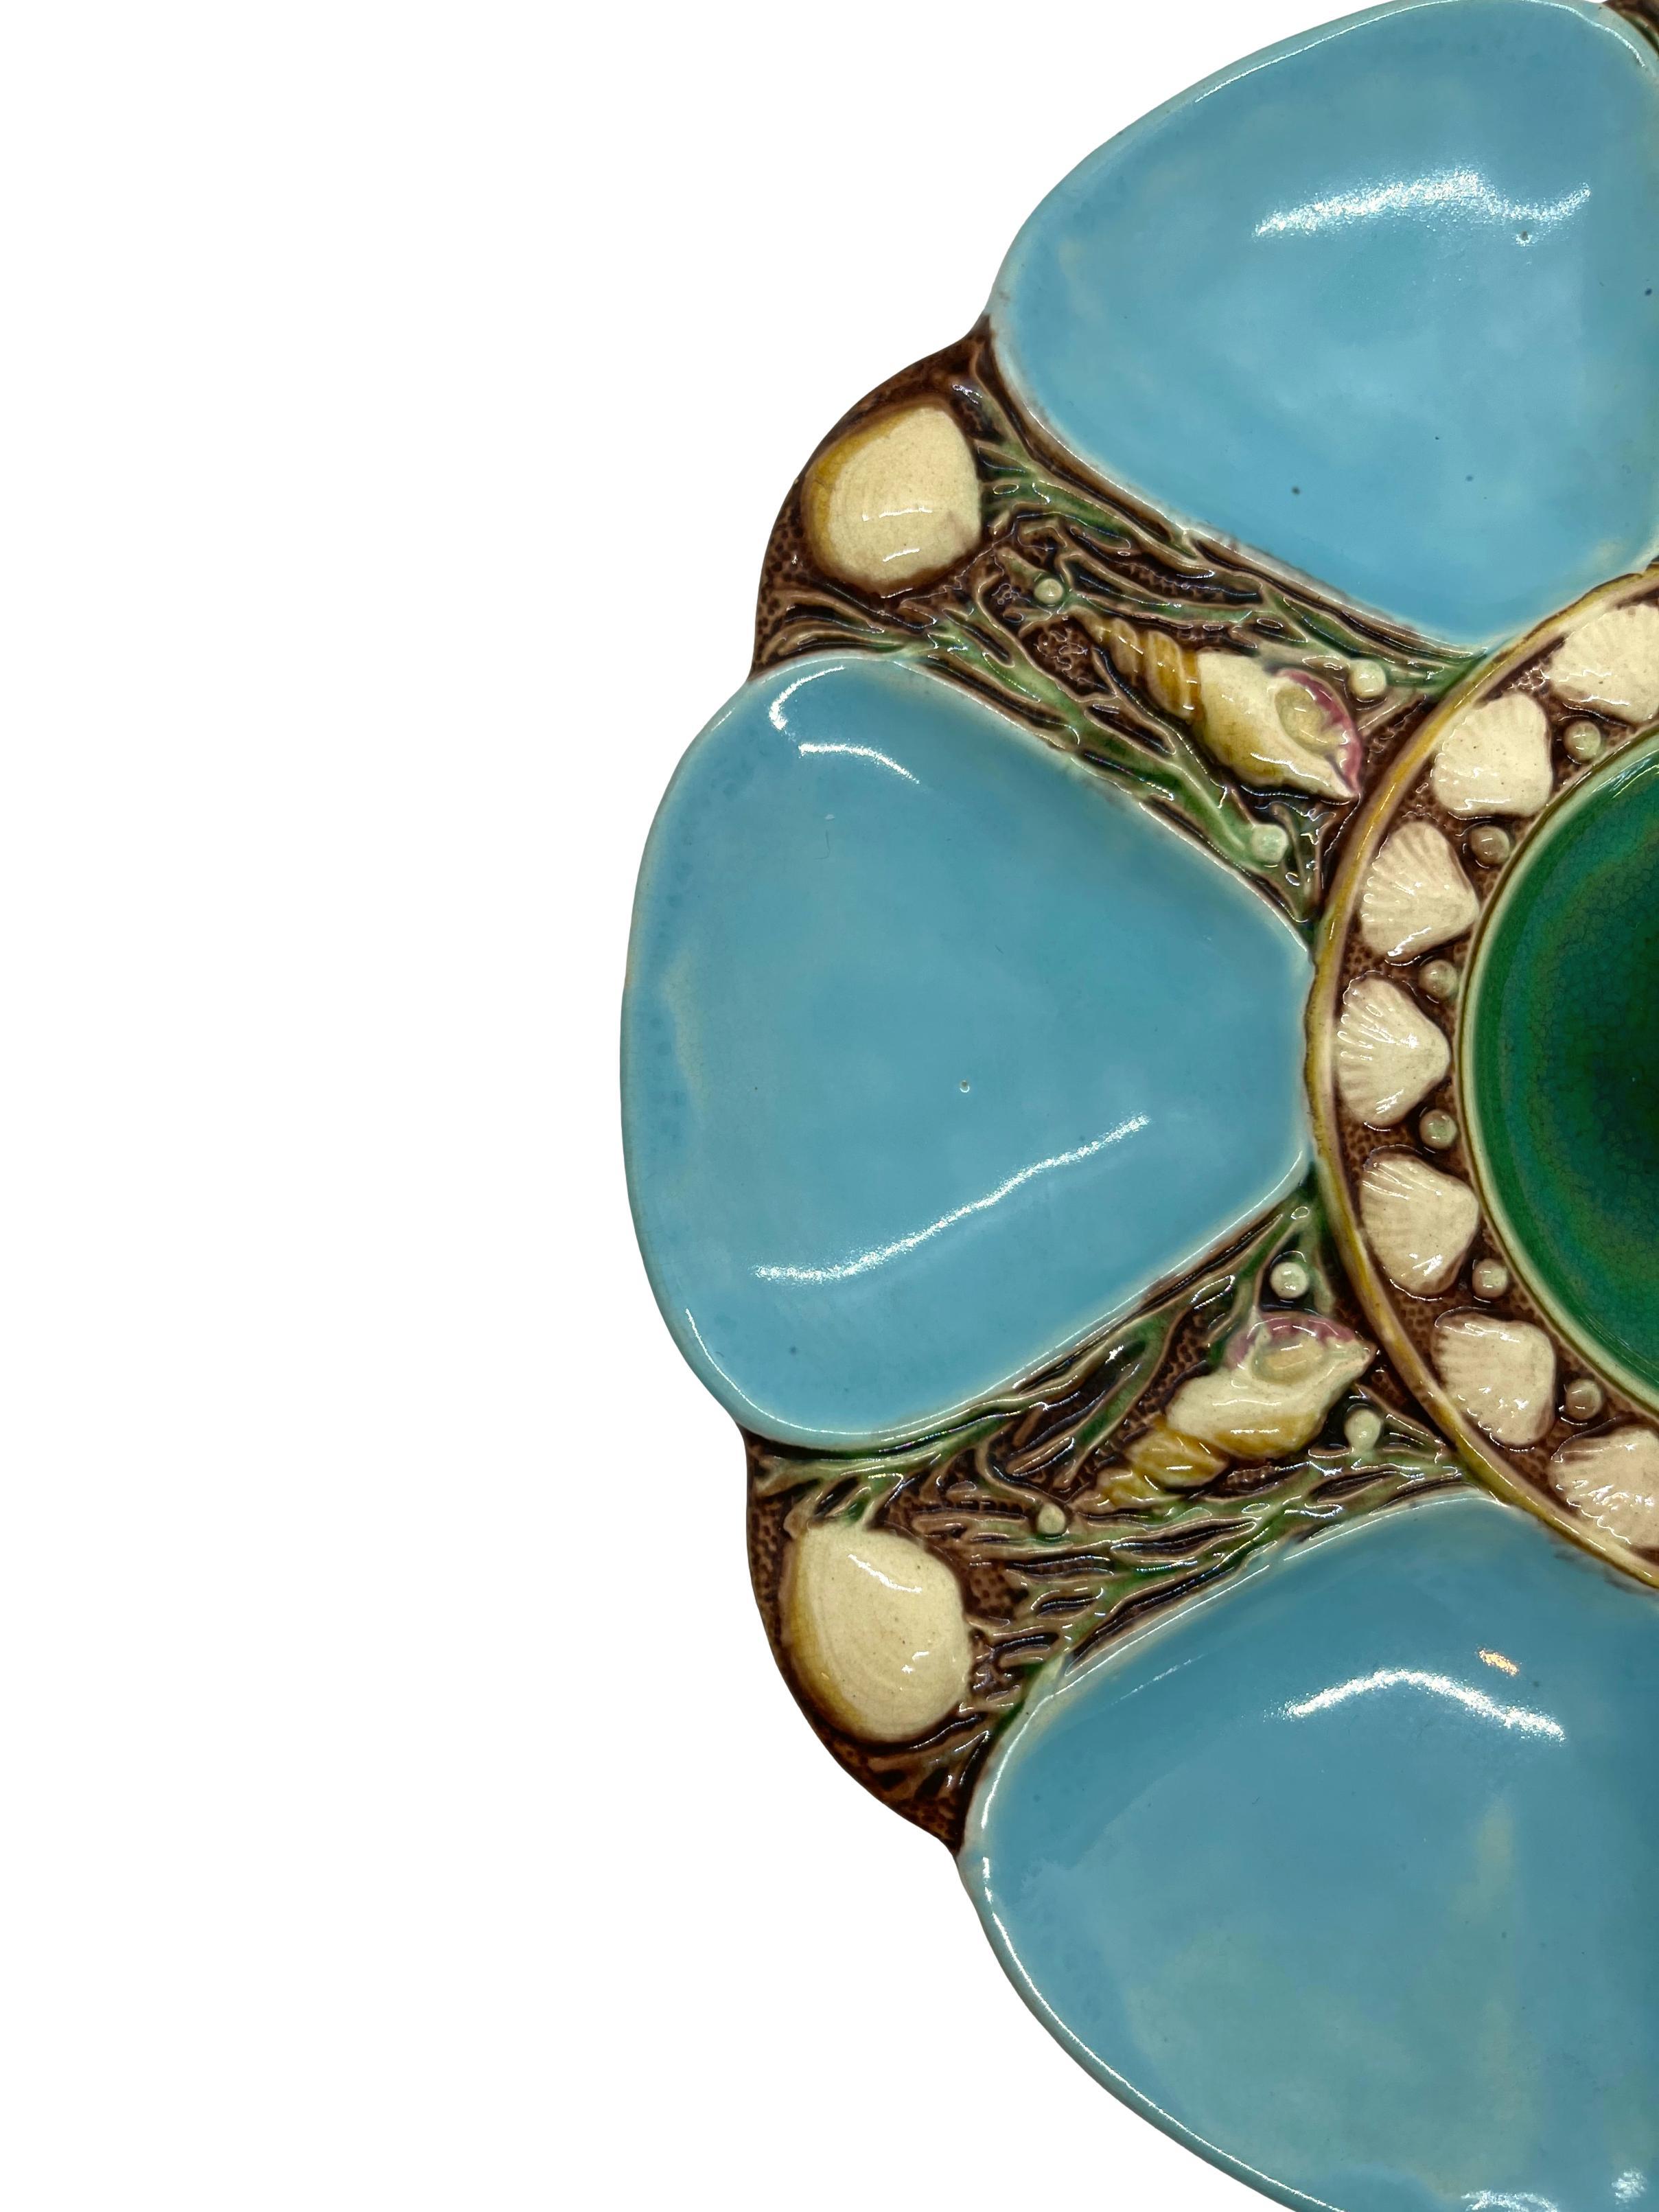 Minton Majolica six-well oyster plate, the wells glazed in turquoise blue, each well separated by shells and seaweed, the central well glazed in green, bordered with shells. Impressed marks to reverse: 'MINTONS' with Minton date cypher for 1874,